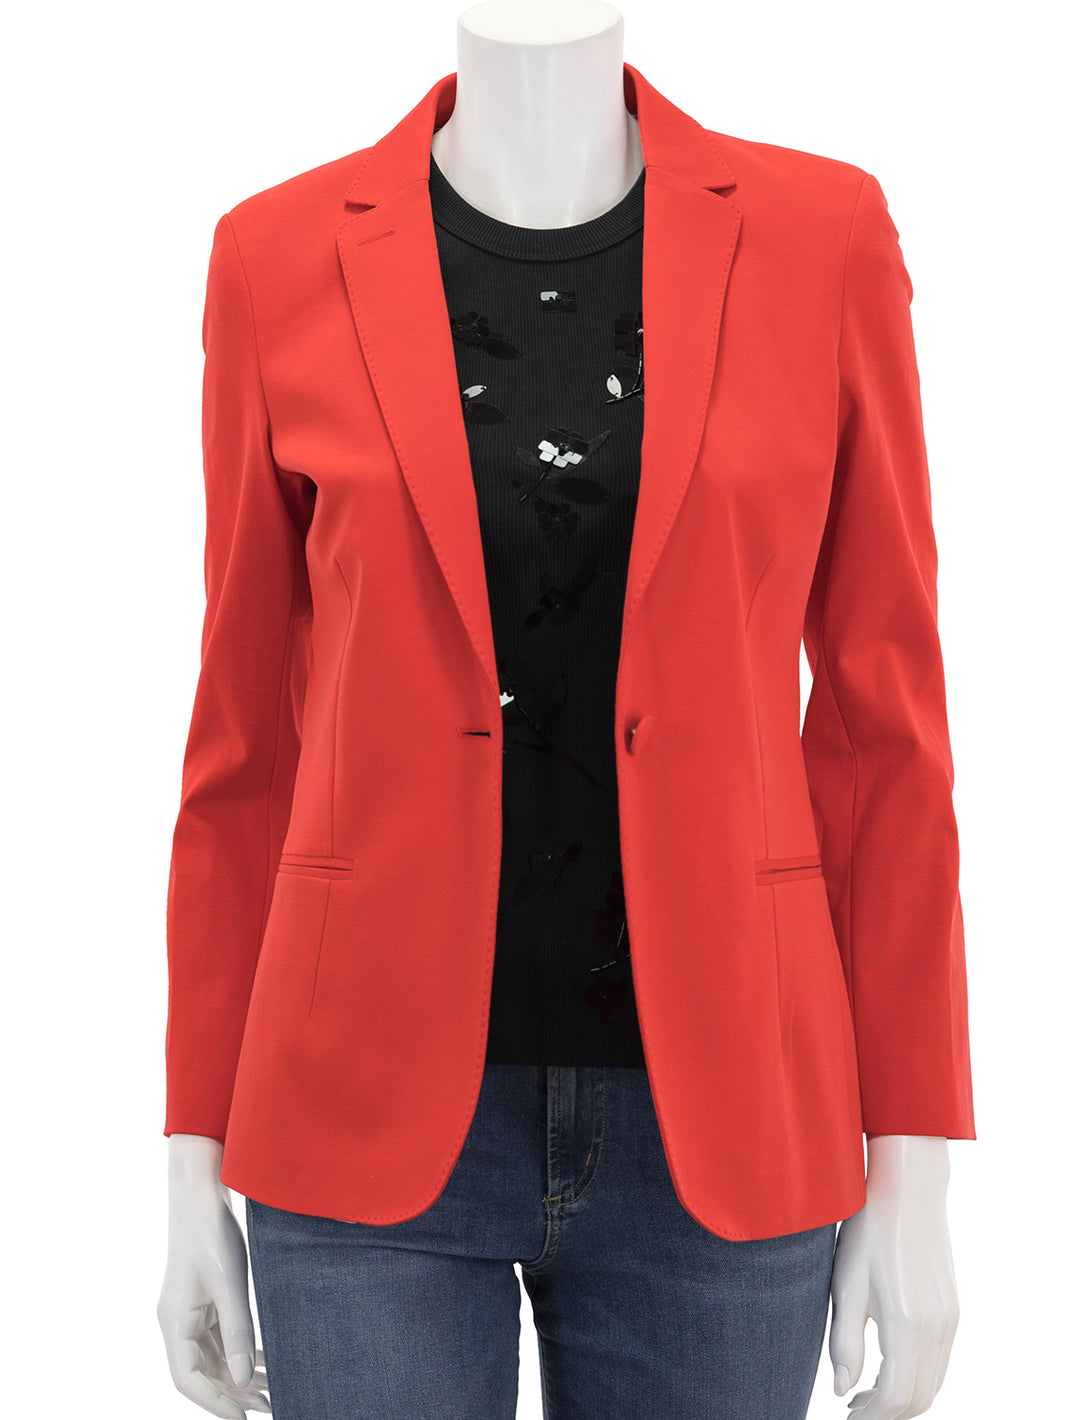 Front view of Vilagallo's hannah blazer in red.